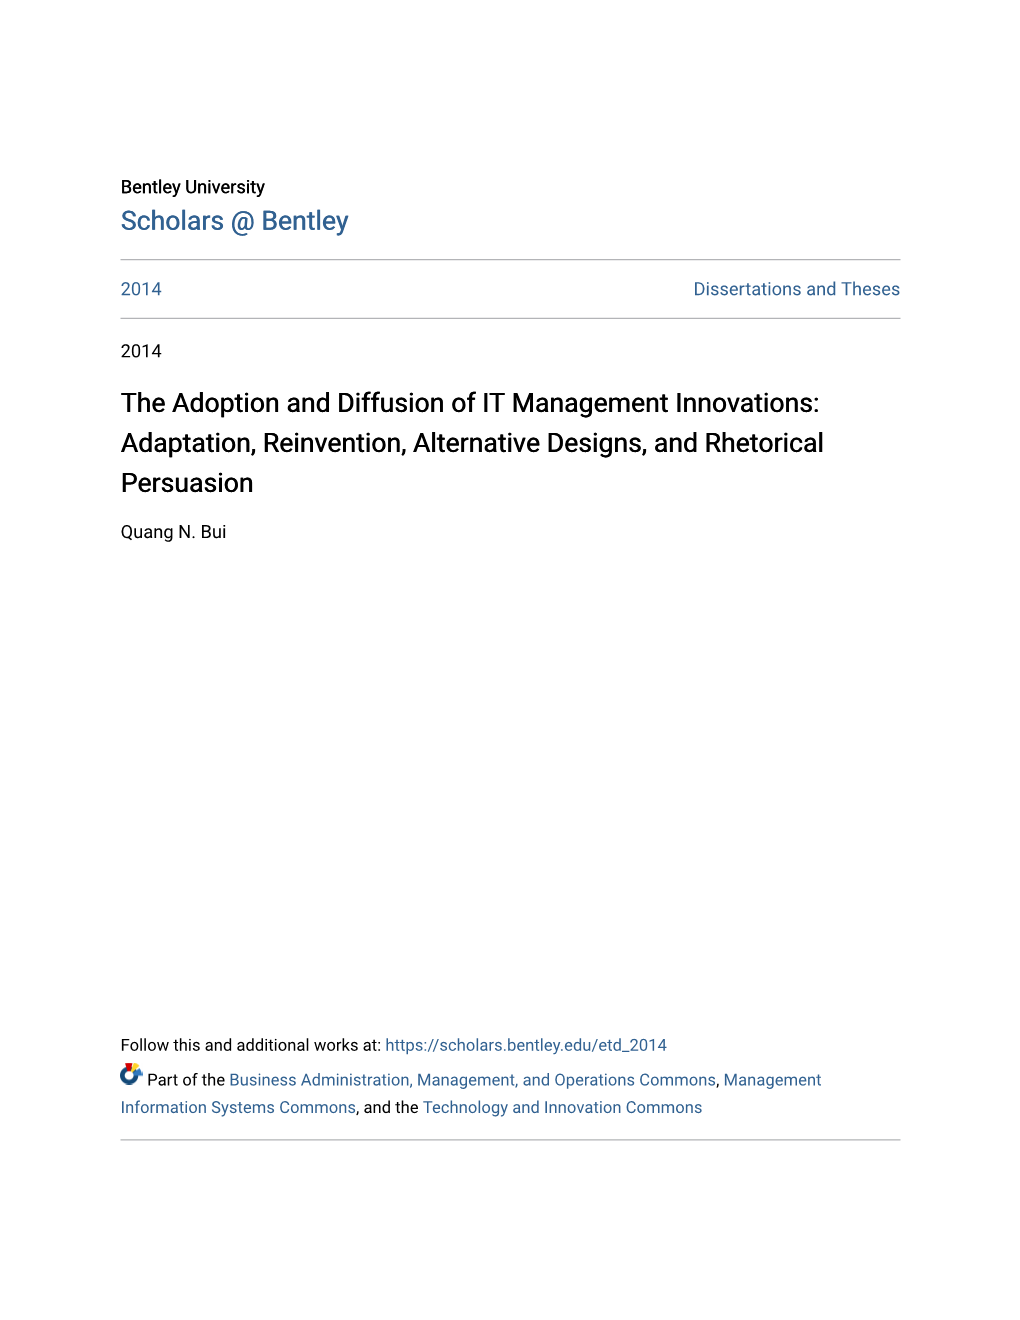 The Adoption and Diffusion of IT Management Innovations: Adaptation, Reinvention, Alternative Designs, and Rhetorical Persuasion